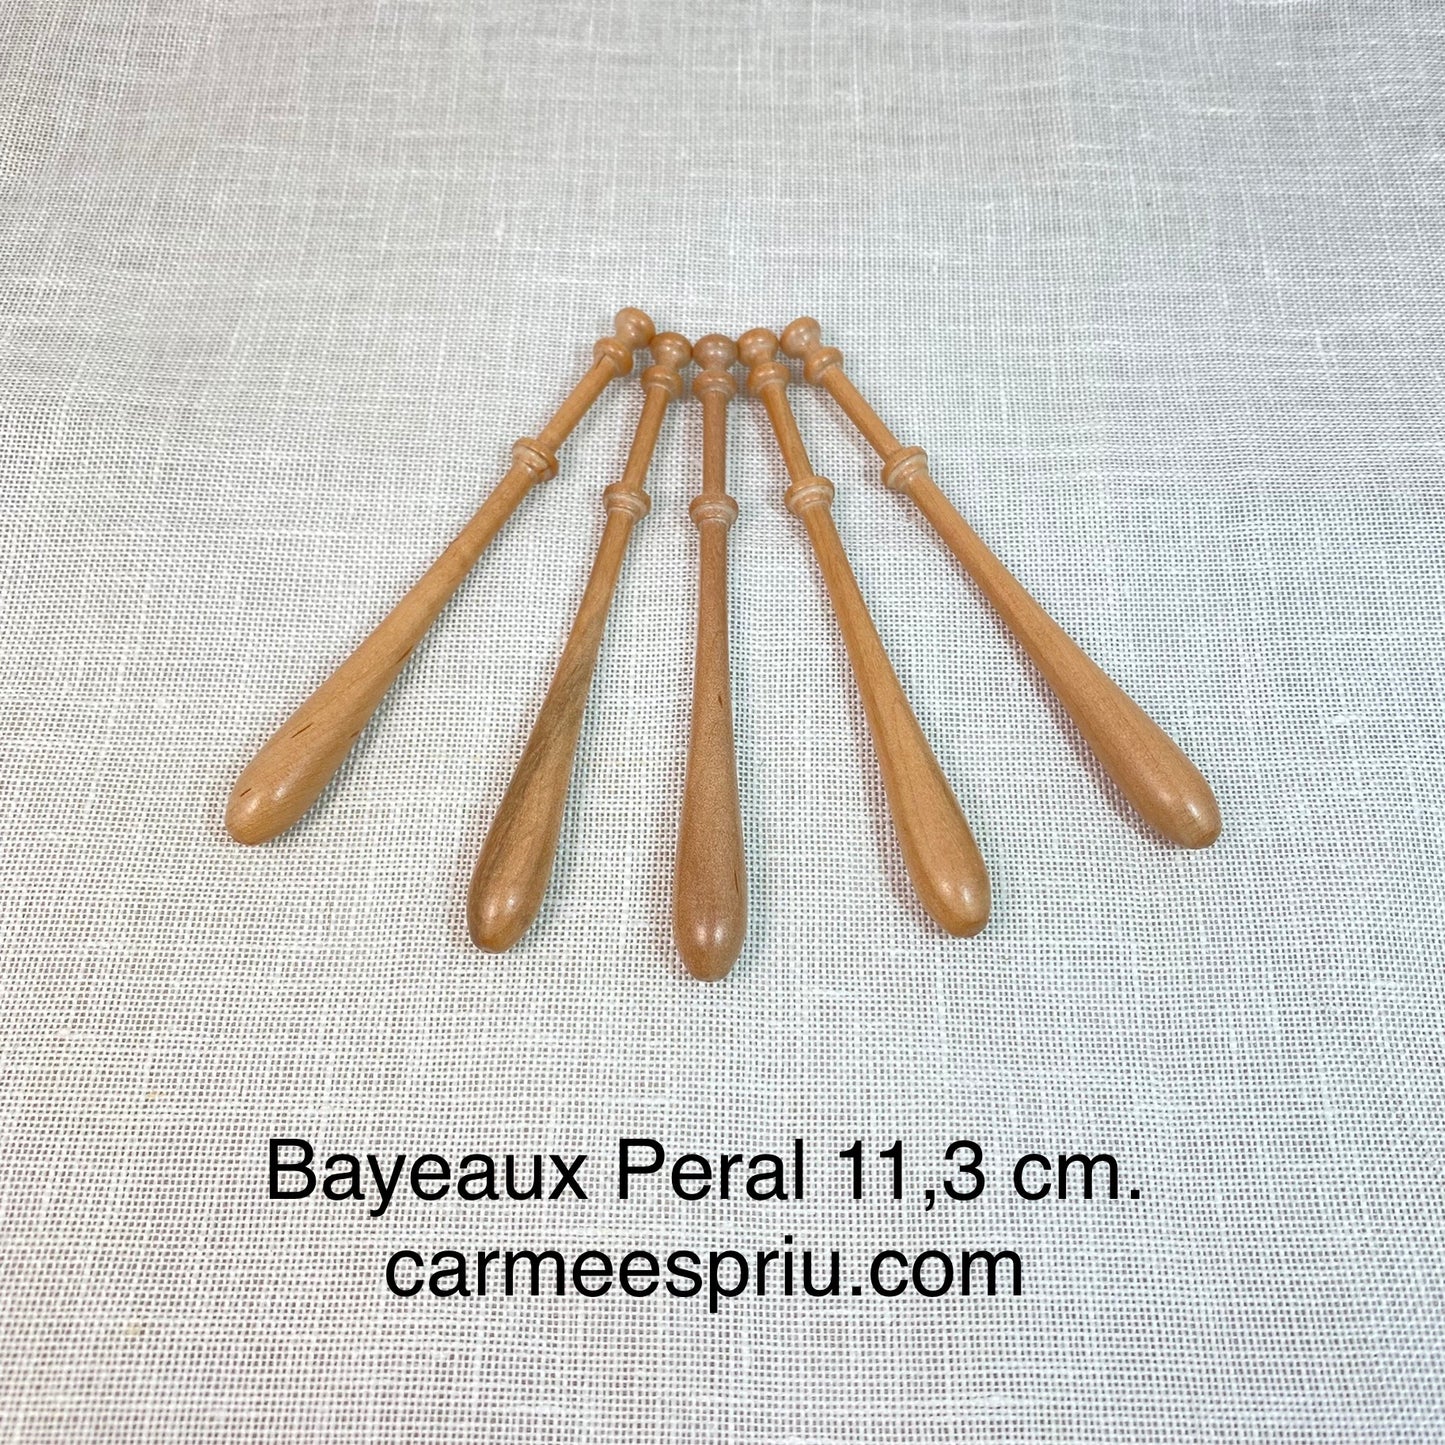 Bayeaux Peral